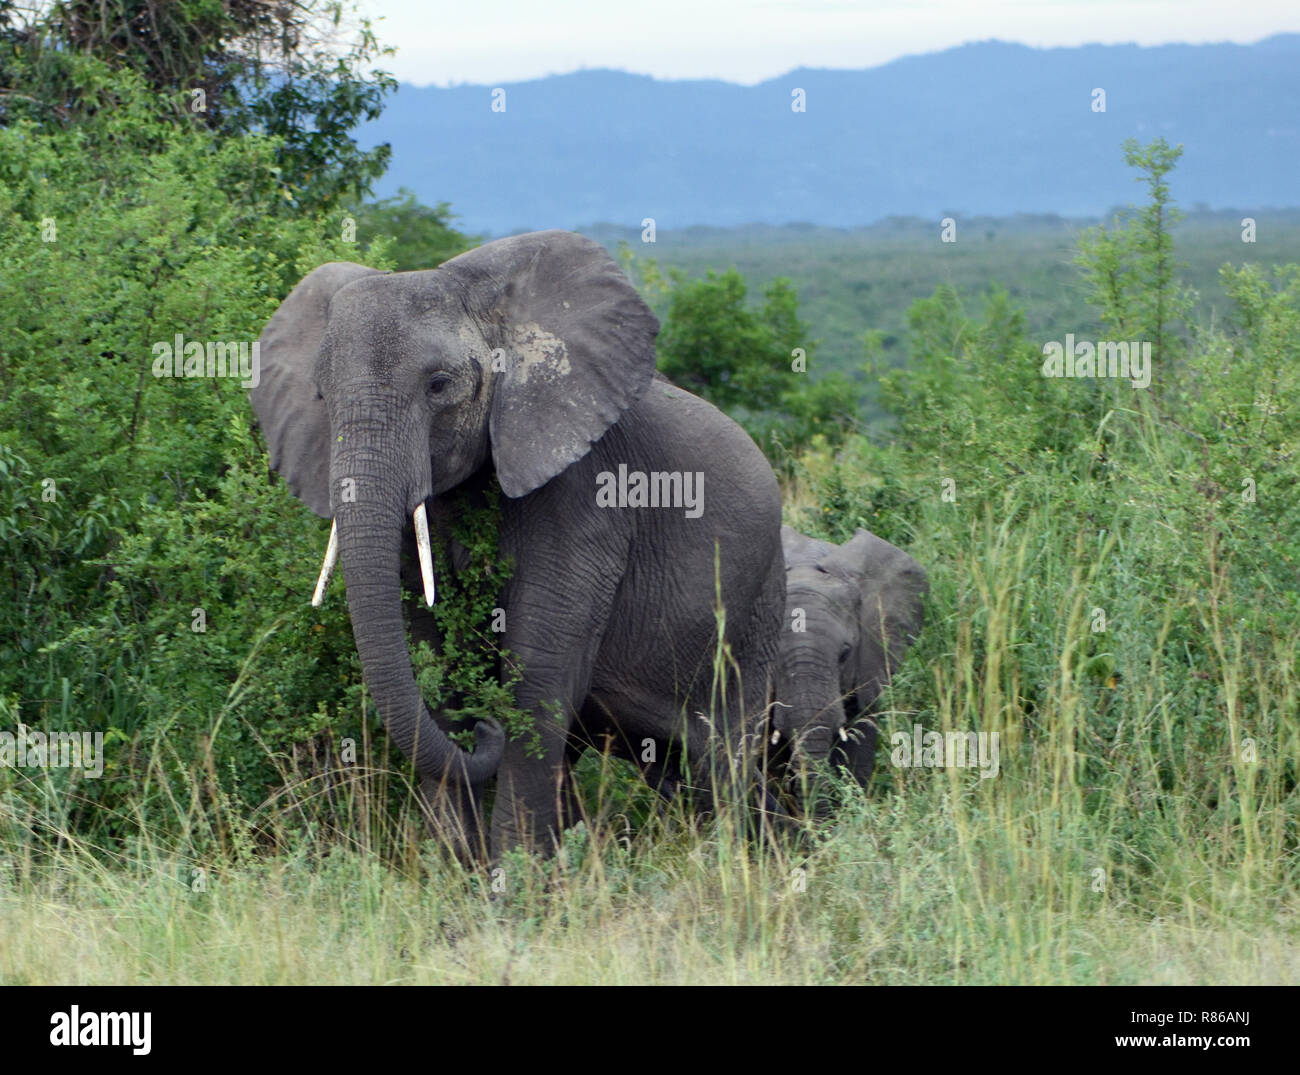 Two elephant (Loxodonta Africana) emerge from scrub into an open space. Queen Elizabeth National Park, Uganda. Stock Photo